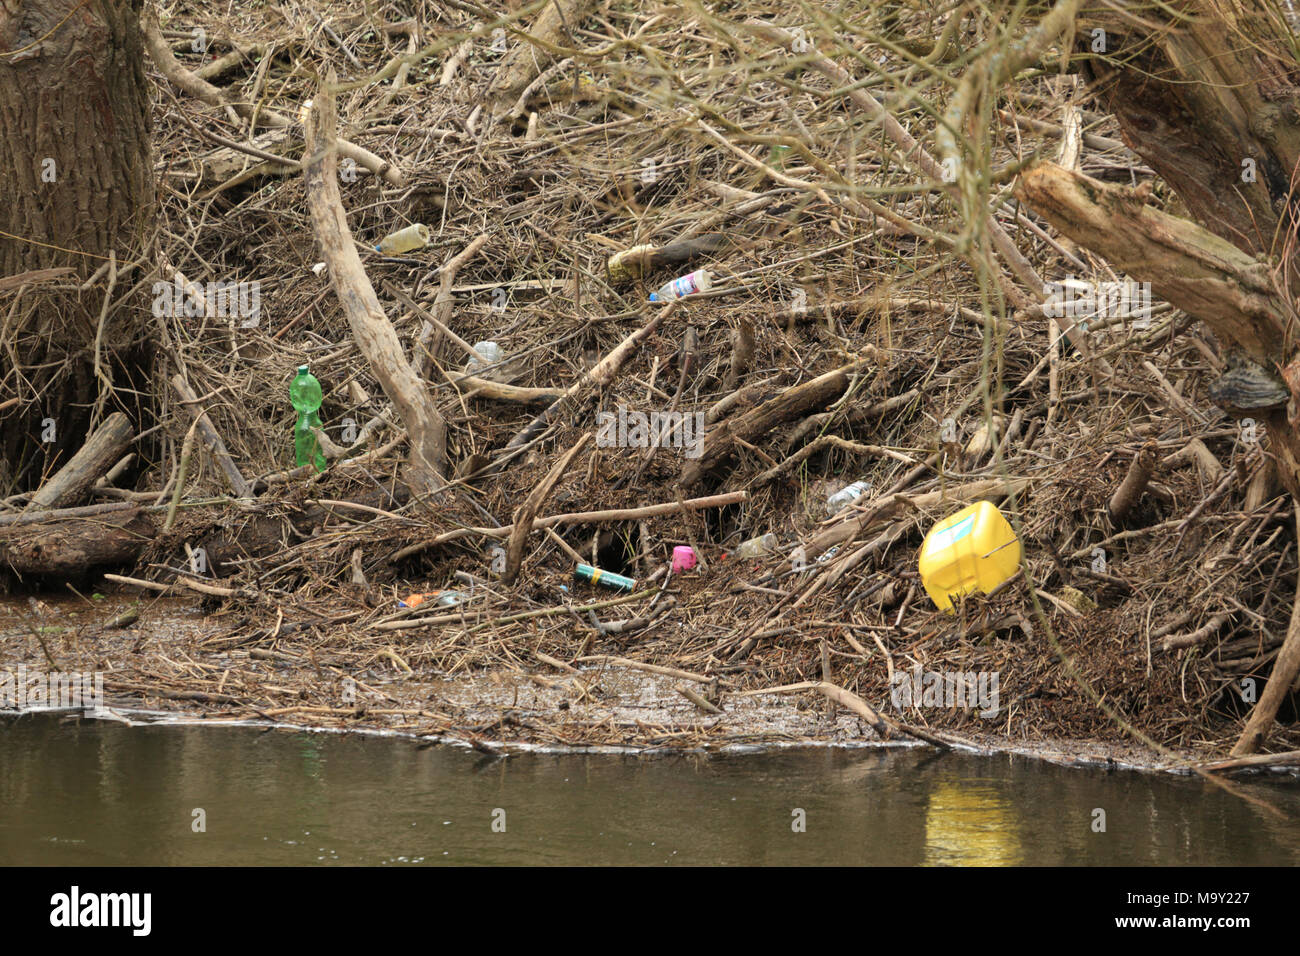 Plastic and other waste on the banks of the river Severn near Bewdley, Worcestershire, uk. Stock Photo